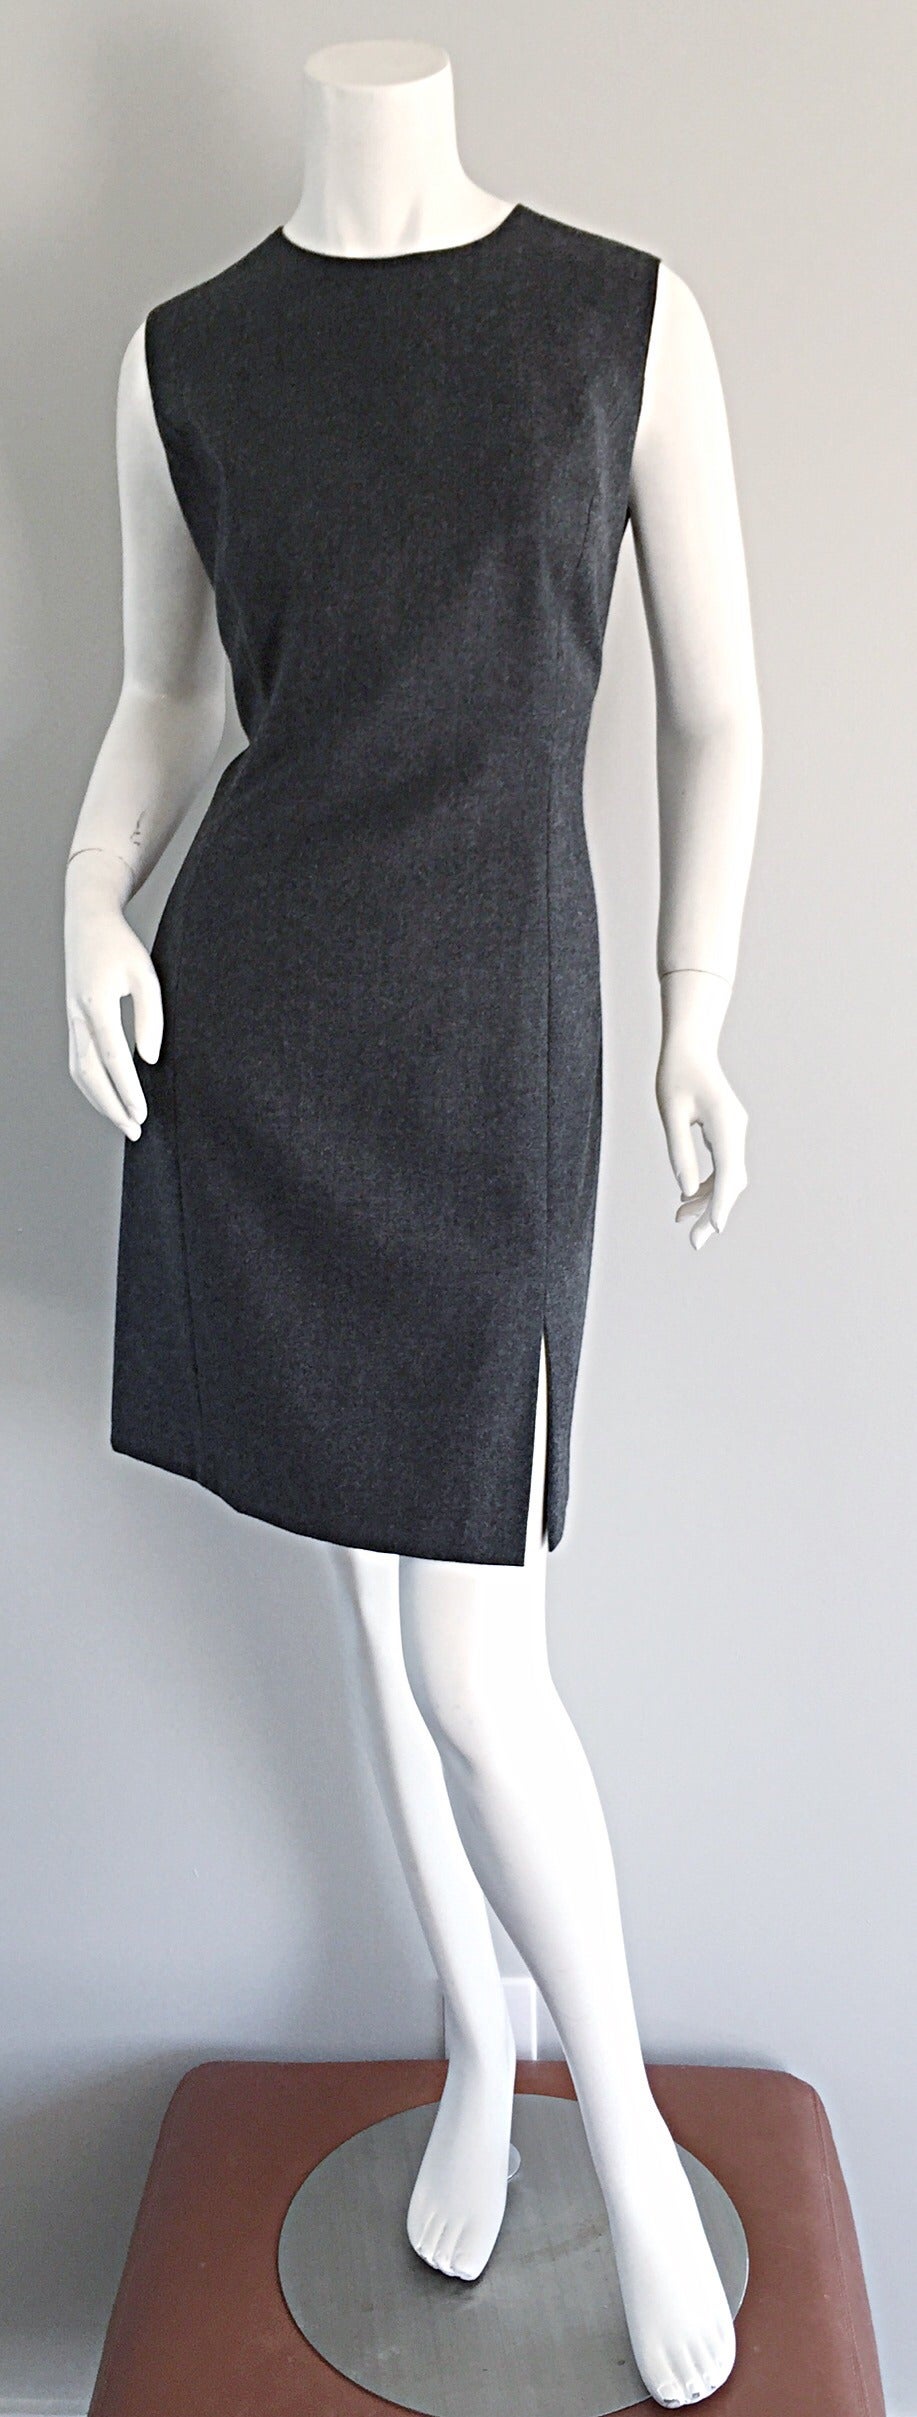 Classic Max Mara/Woolmark charcoal grey dress AND jacket! Utterly chic and sophisticated, with an incredible fit! Skirt features a side slit. Looks great alone, or belted. Jacket buttons up the front, and features pockets at both sides. The jacket